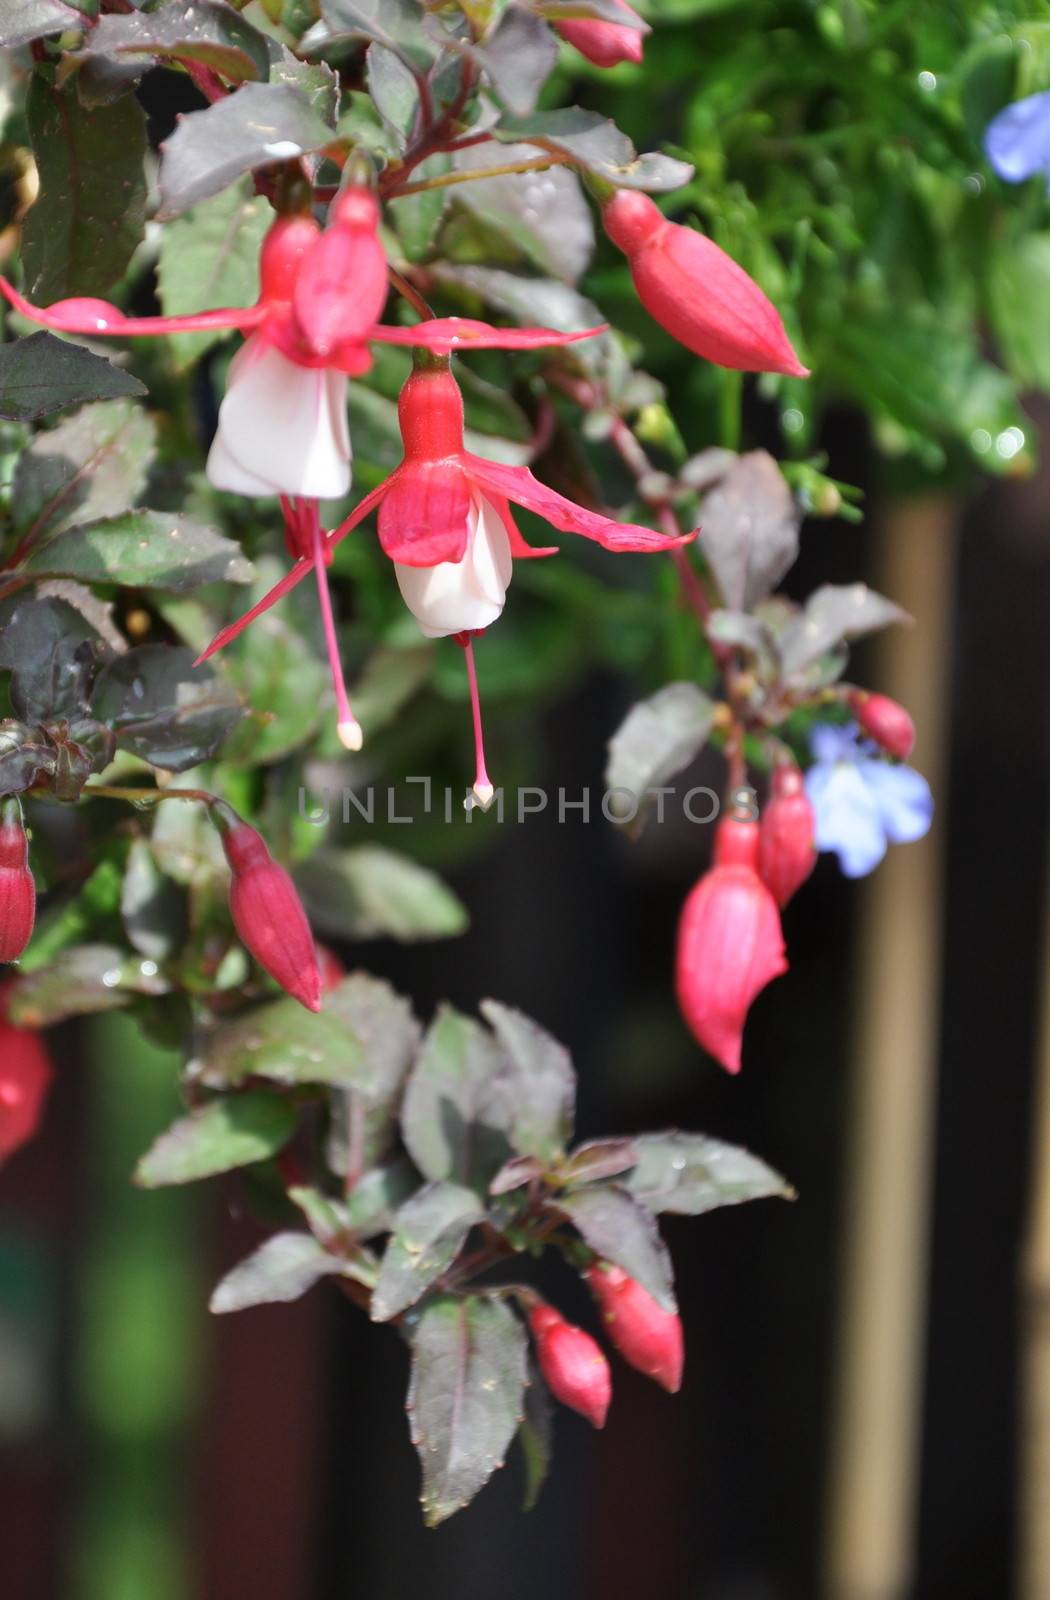 fuchsia growing in a hanging basket showing off its blooms